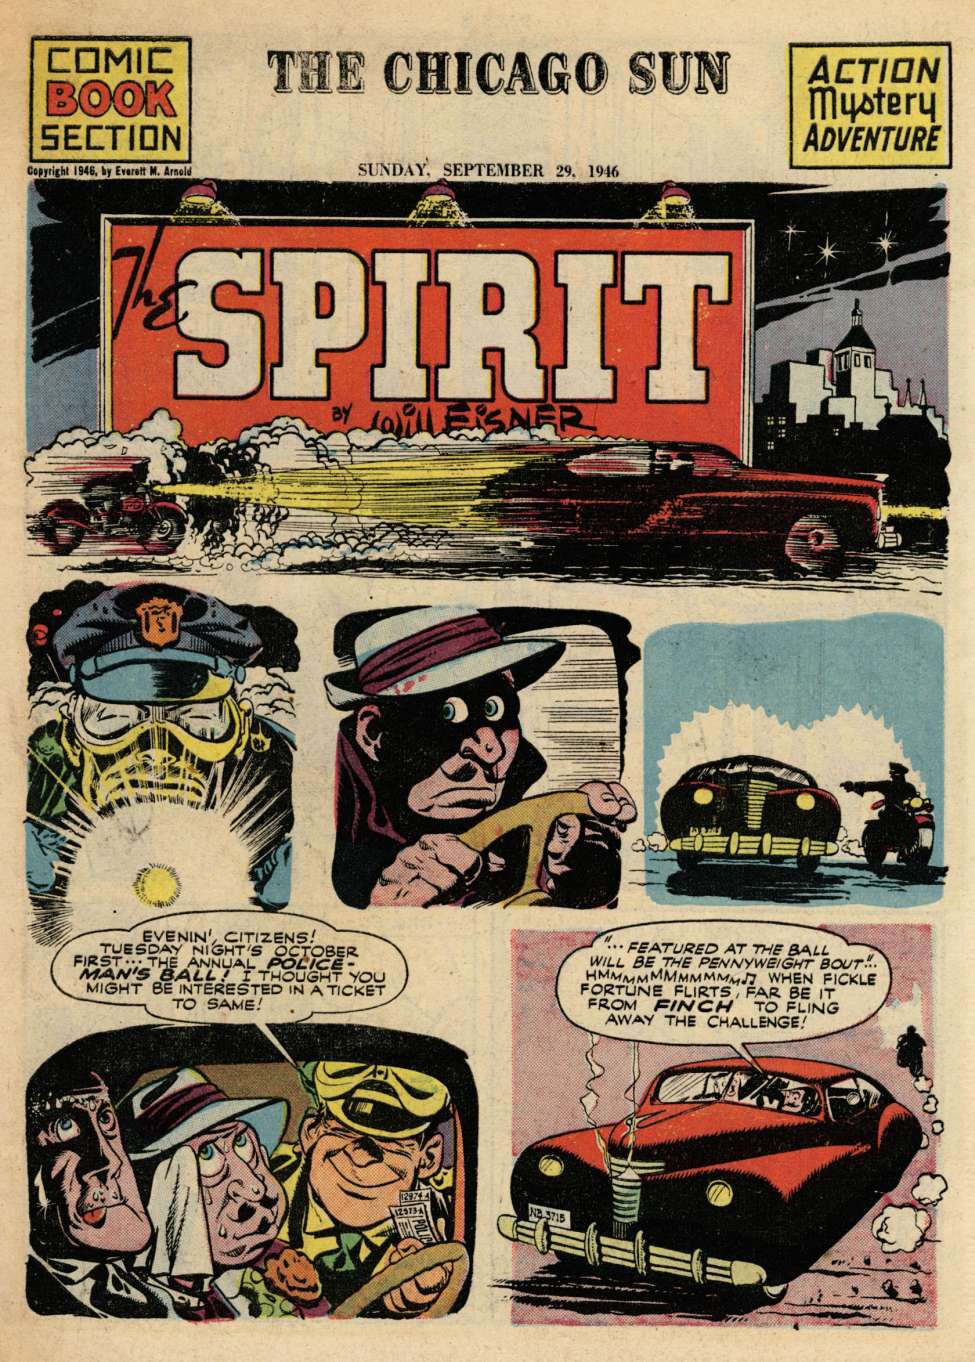 Book Cover For The Spirit (1946-09-29) - Chicago Sun